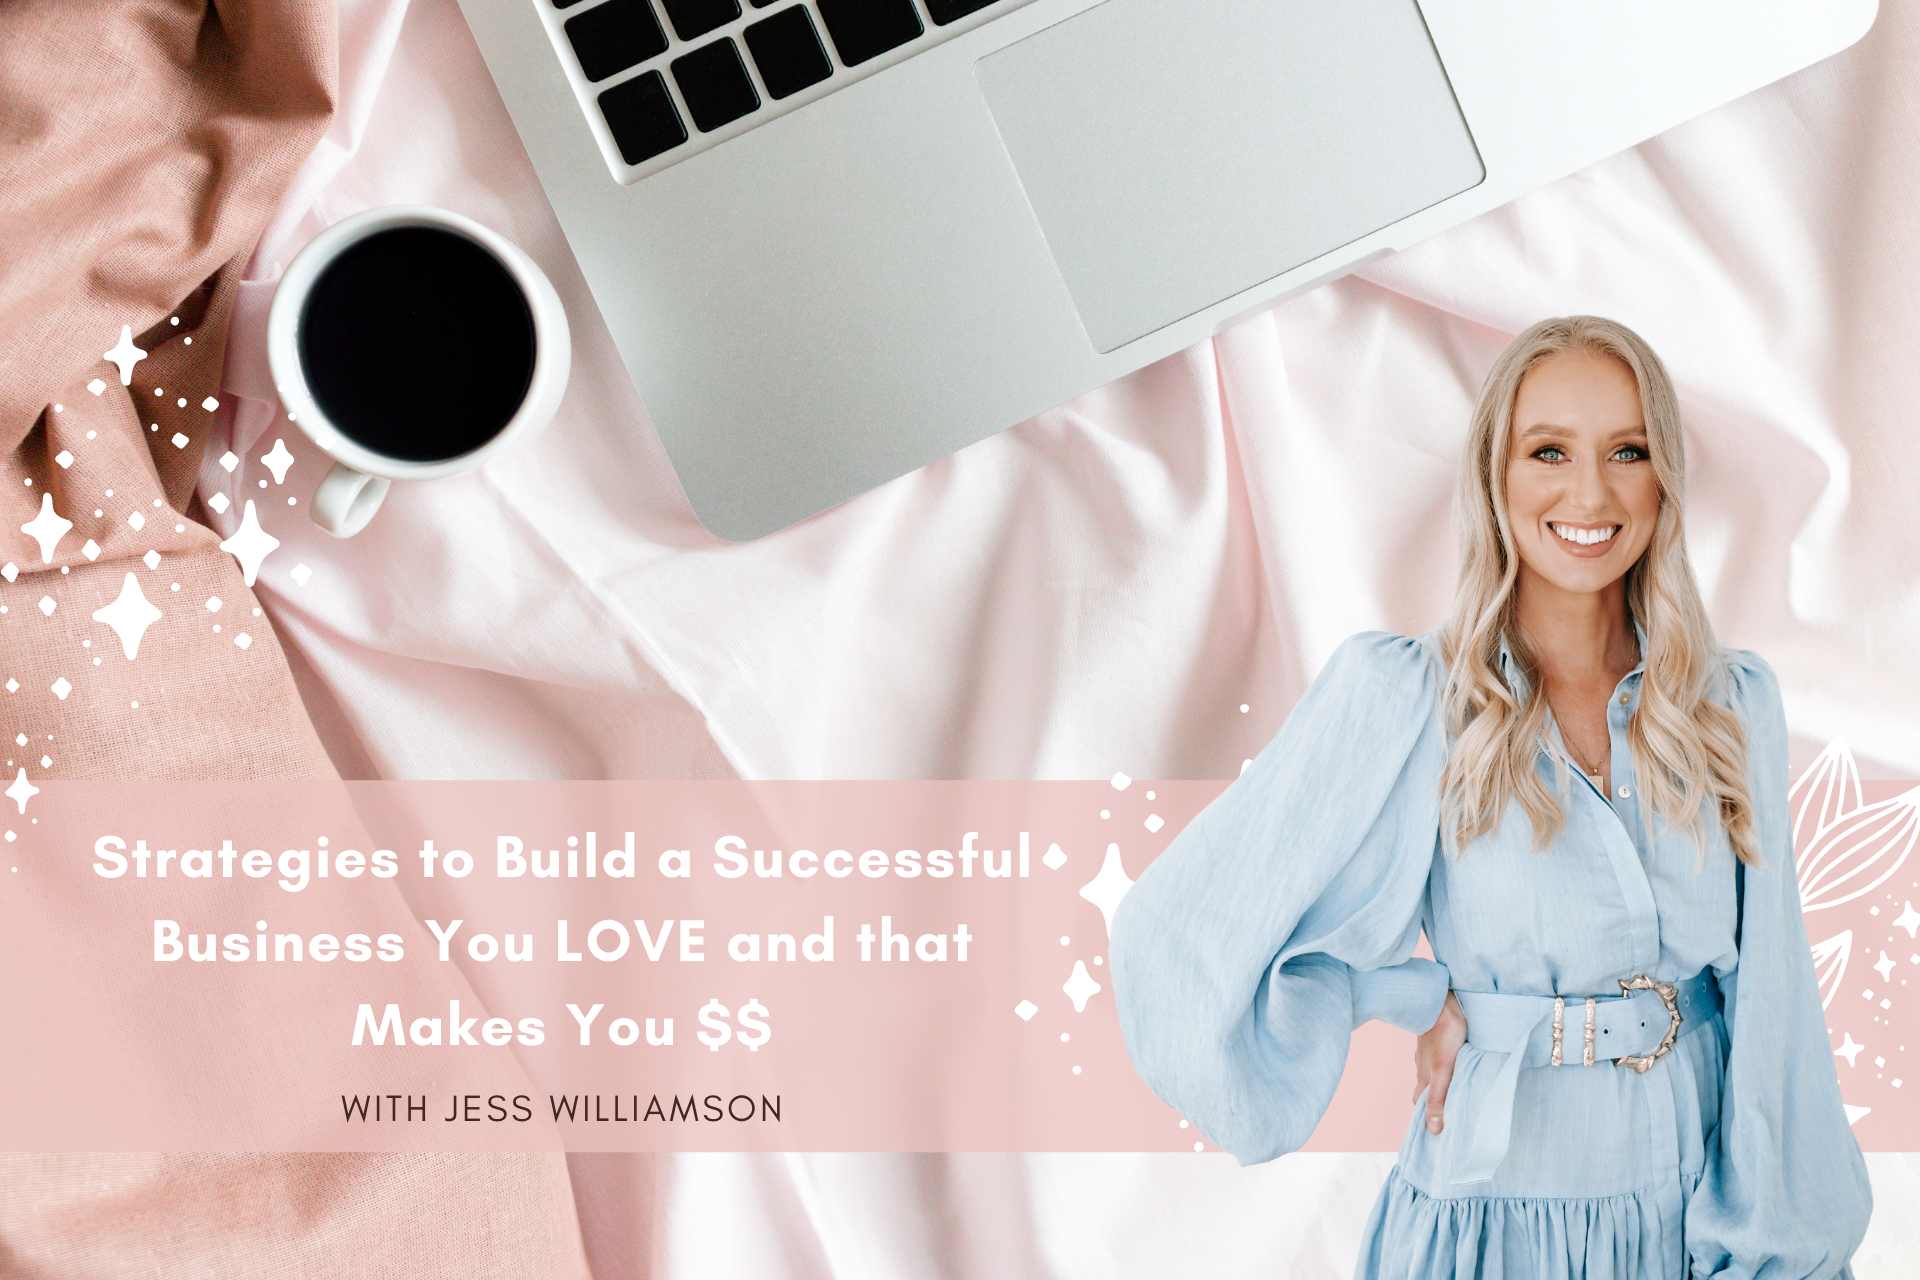 strategies to build a successful business with Jess Williamson